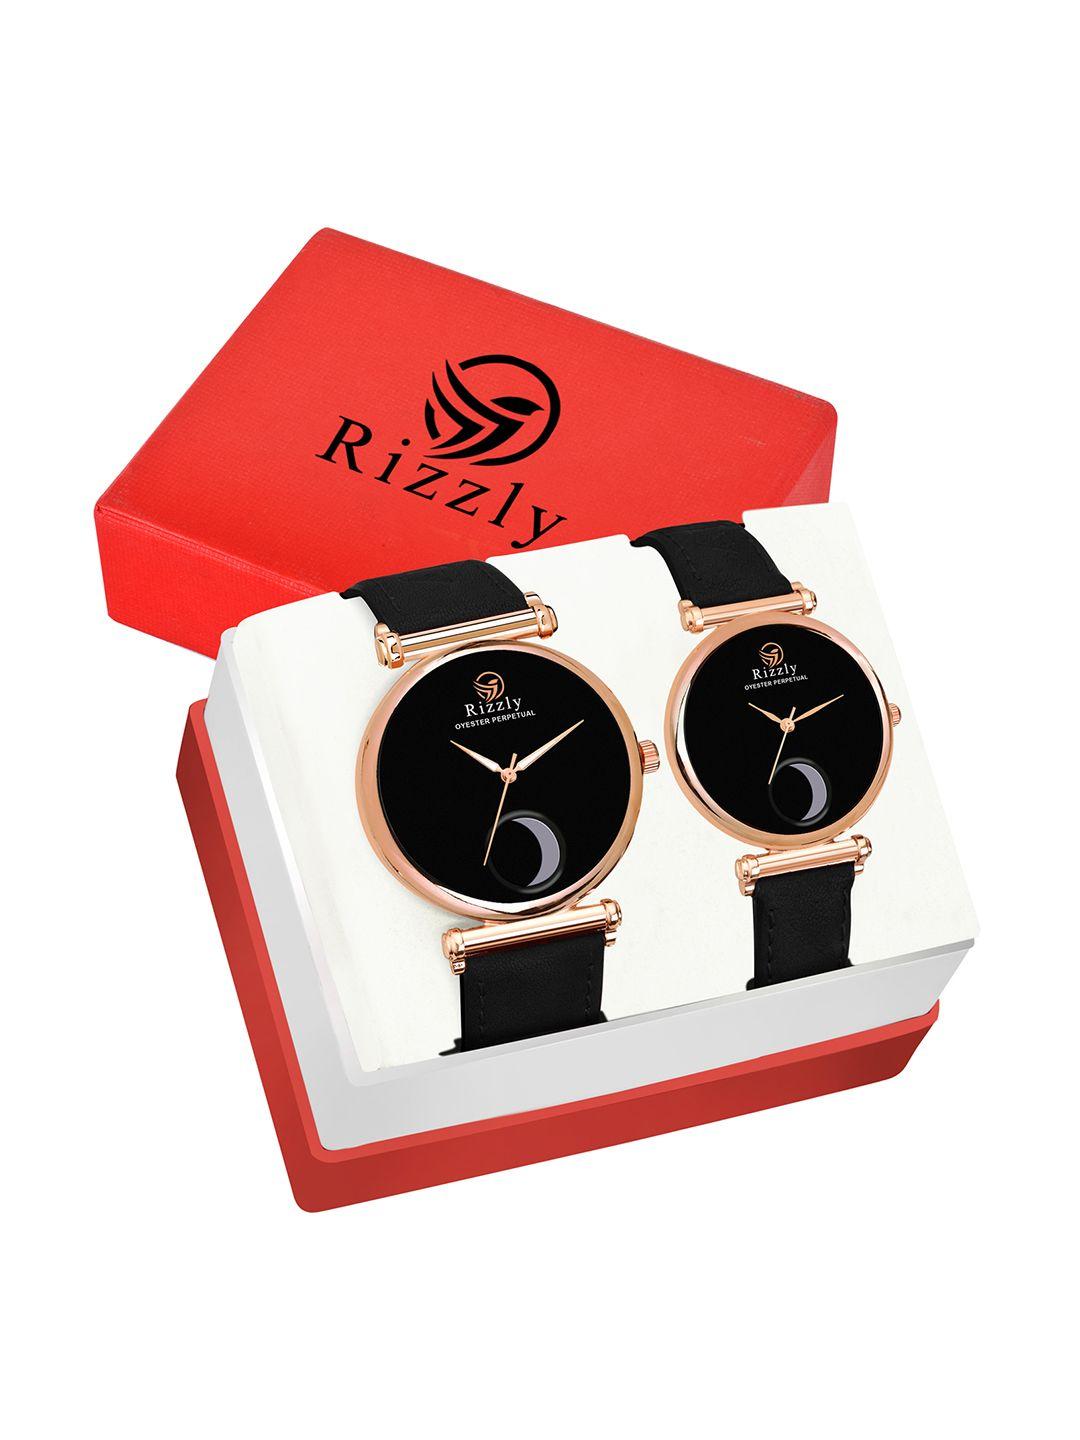 rizzly unisex  black brass dial black leather straps analogue watch gift set   rz-302-304